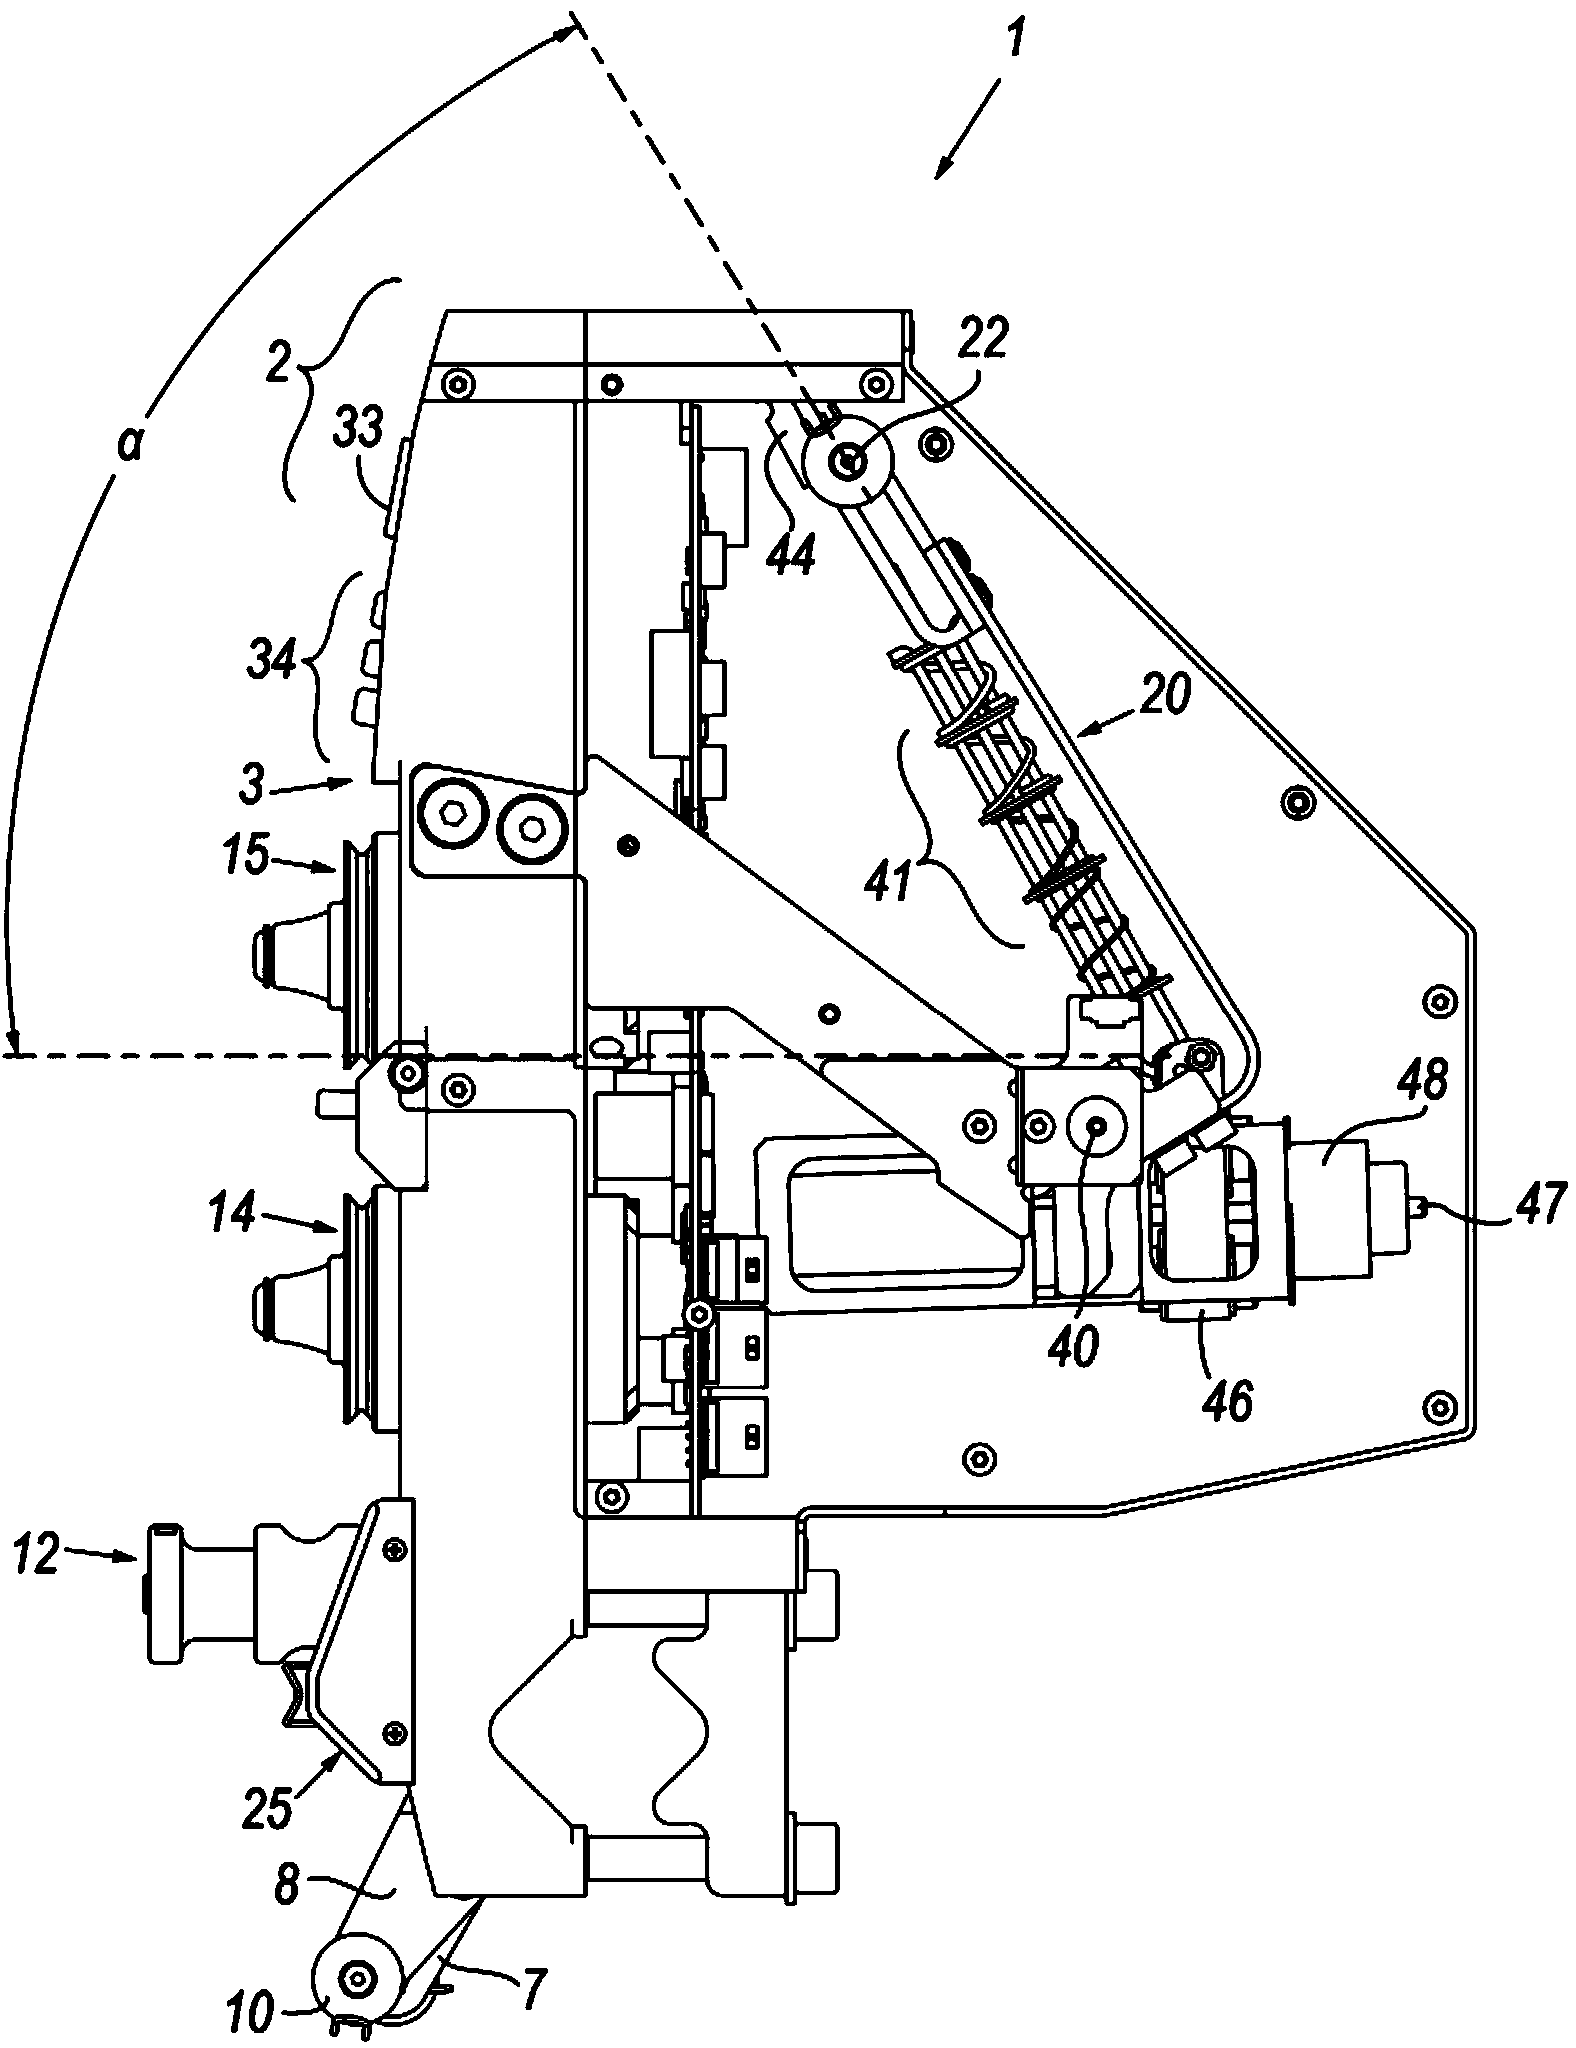 Positive feeder device for feeding metal wires at constant tension